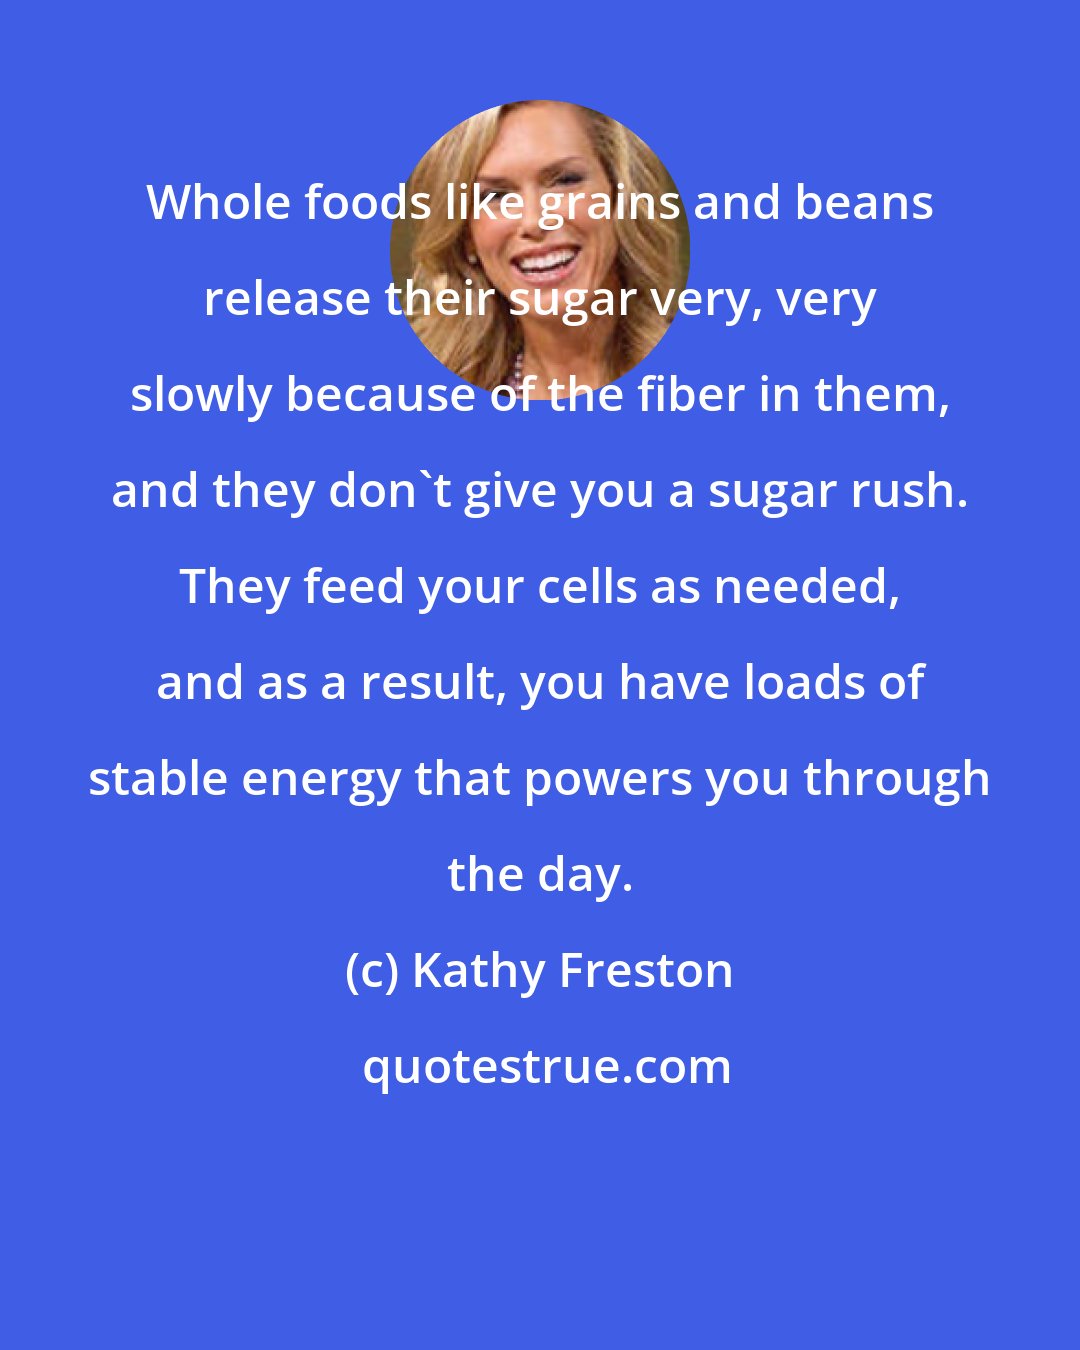 Kathy Freston: Whole foods like grains and beans release their sugar very, very slowly because of the fiber in them, and they don't give you a sugar rush. They feed your cells as needed, and as a result, you have loads of stable energy that powers you through the day.